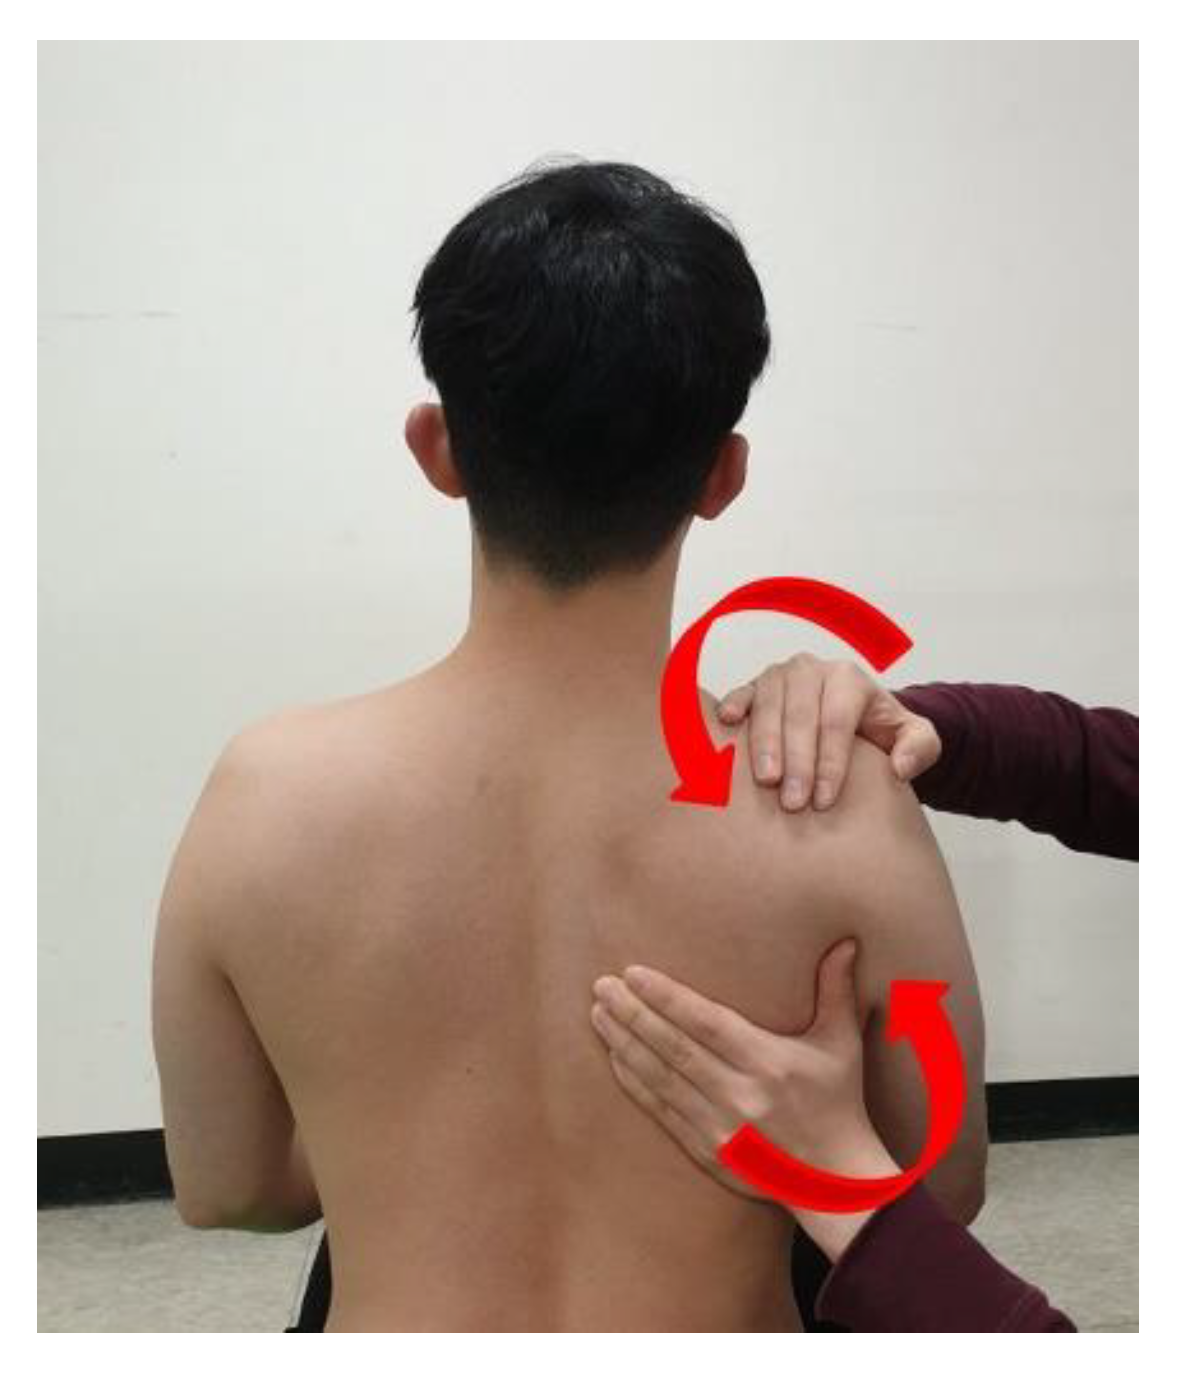 Postural cues for scapular retraction and depression promote